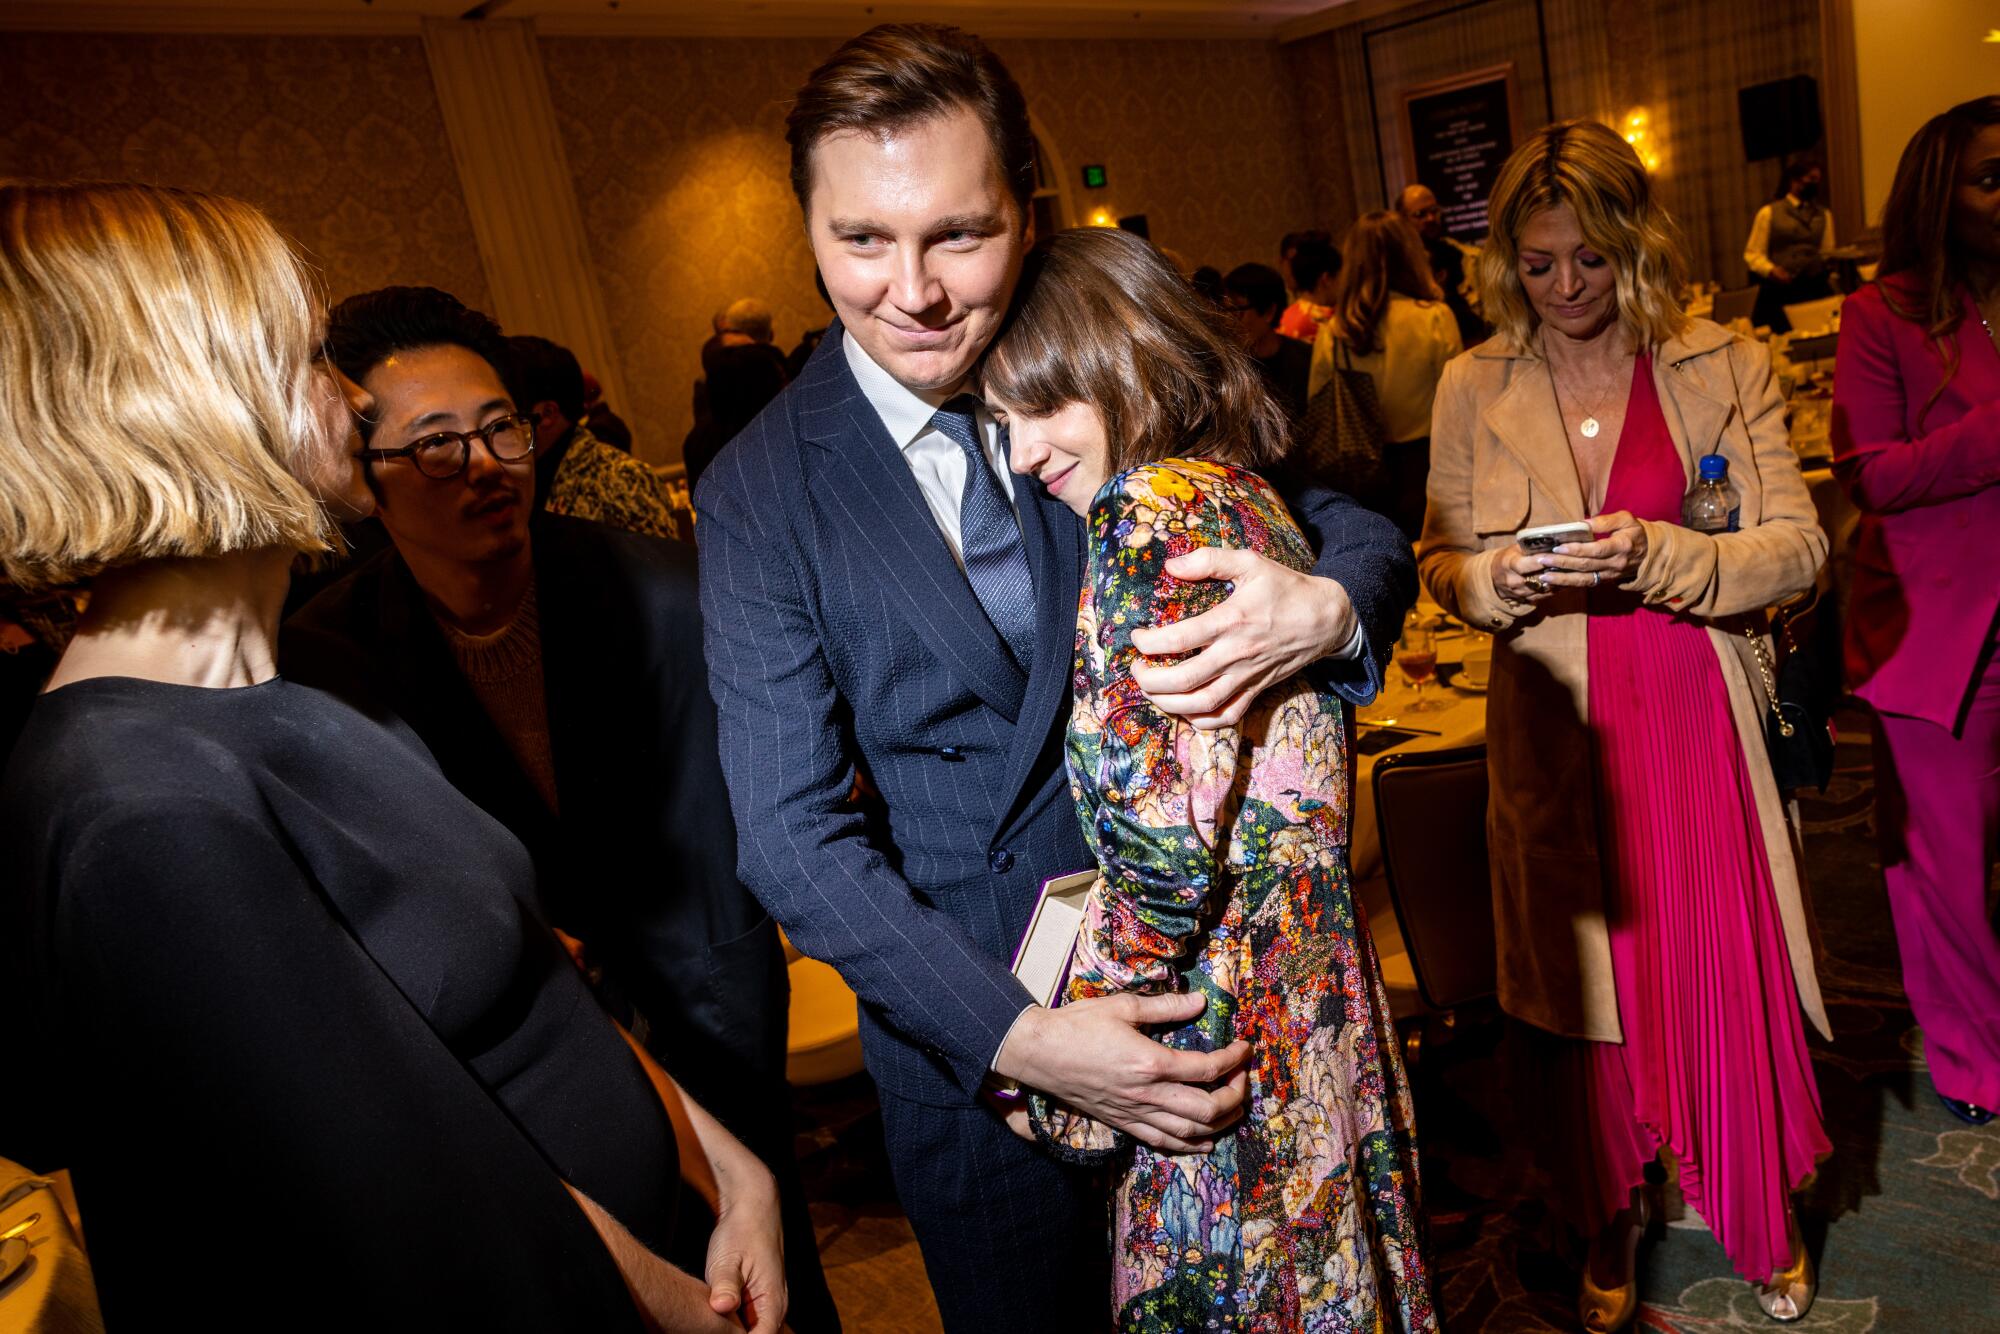 Paul Dano of "The Fabelmans" with his wife, actress Zoe Kazan of  "She Said."